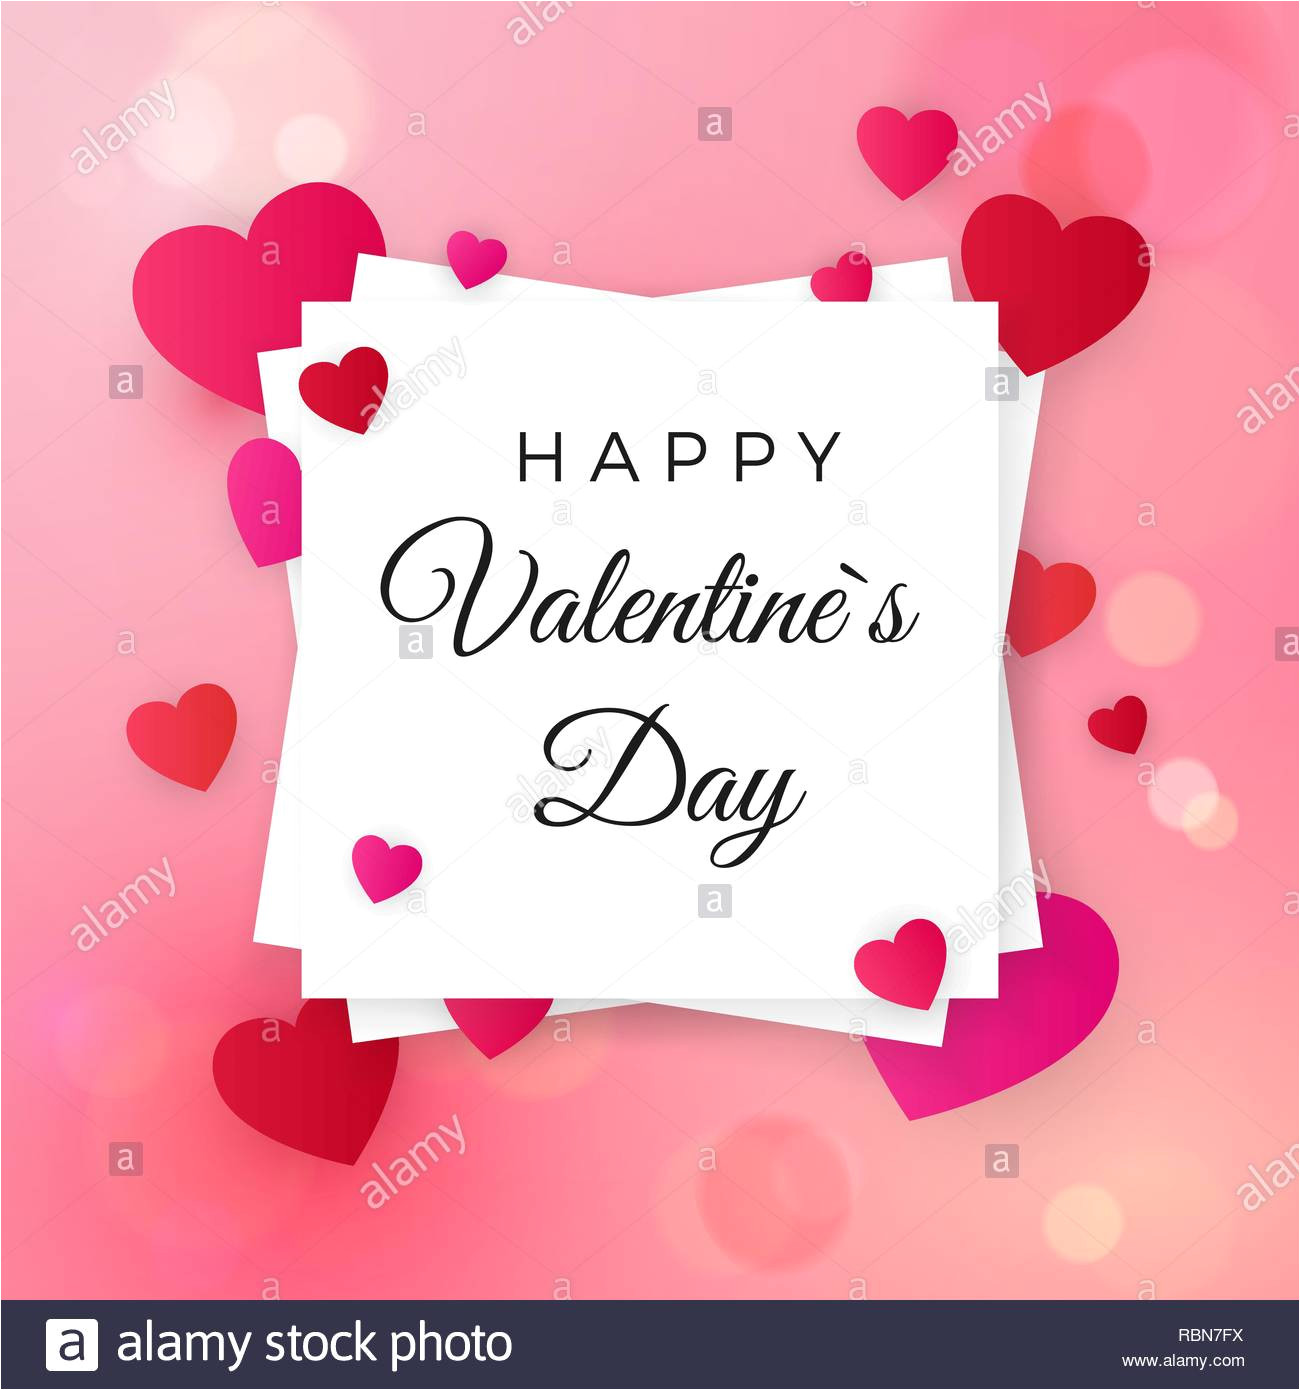 Happy Valentine Day Card with Name Happy Valentines Day and Wedding Design Elements Greeting